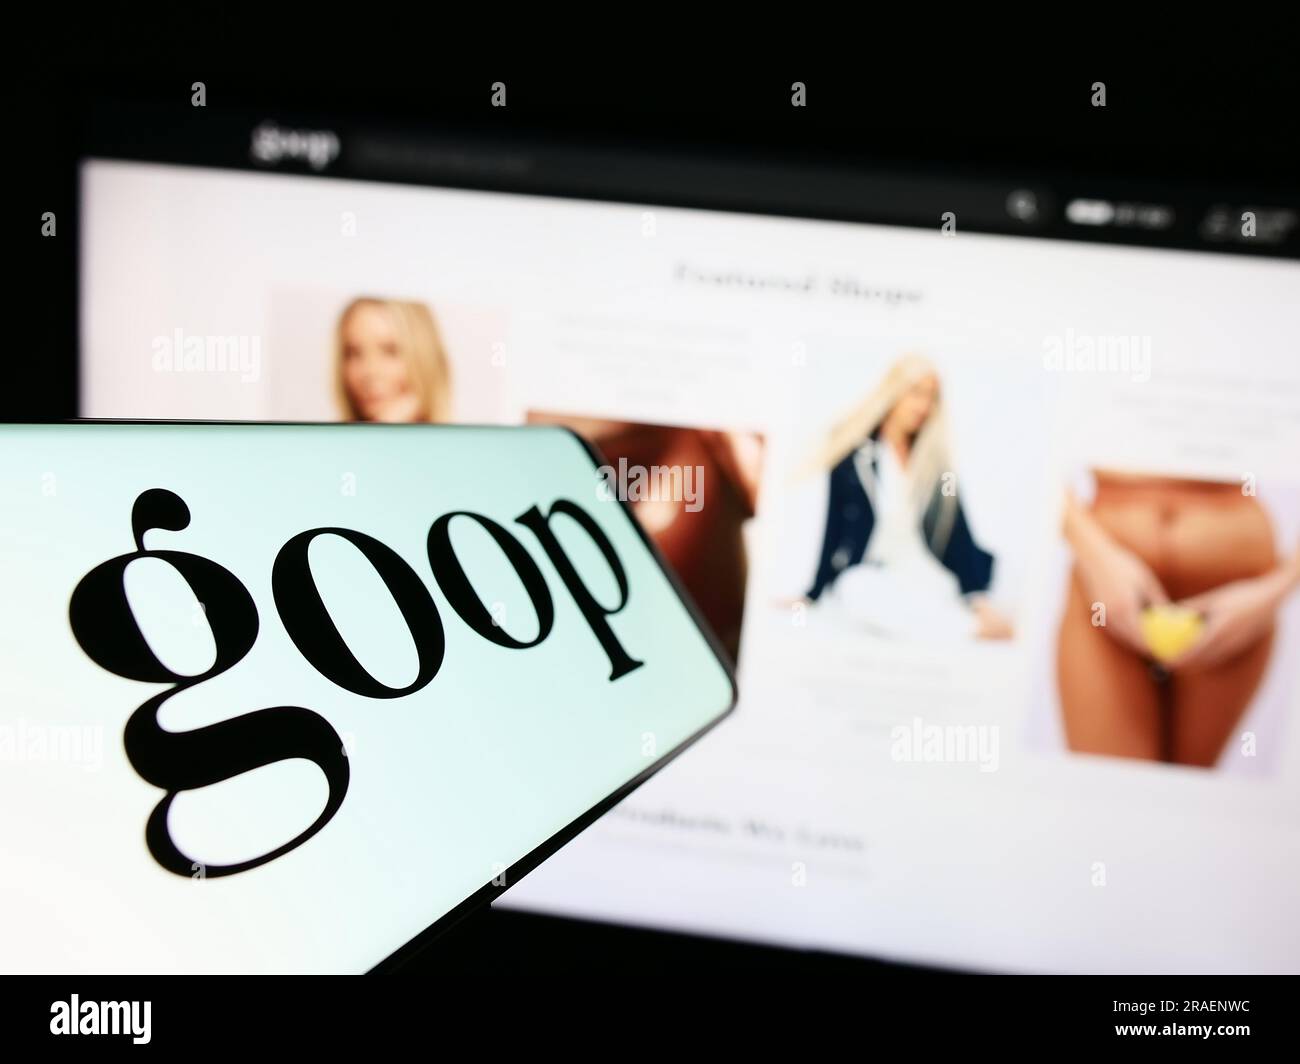 Mobile phone with logo of US publishing and e-commerce company Goop Inc. on screen in front of website. Focus on center-left of phone display. Stock Photo